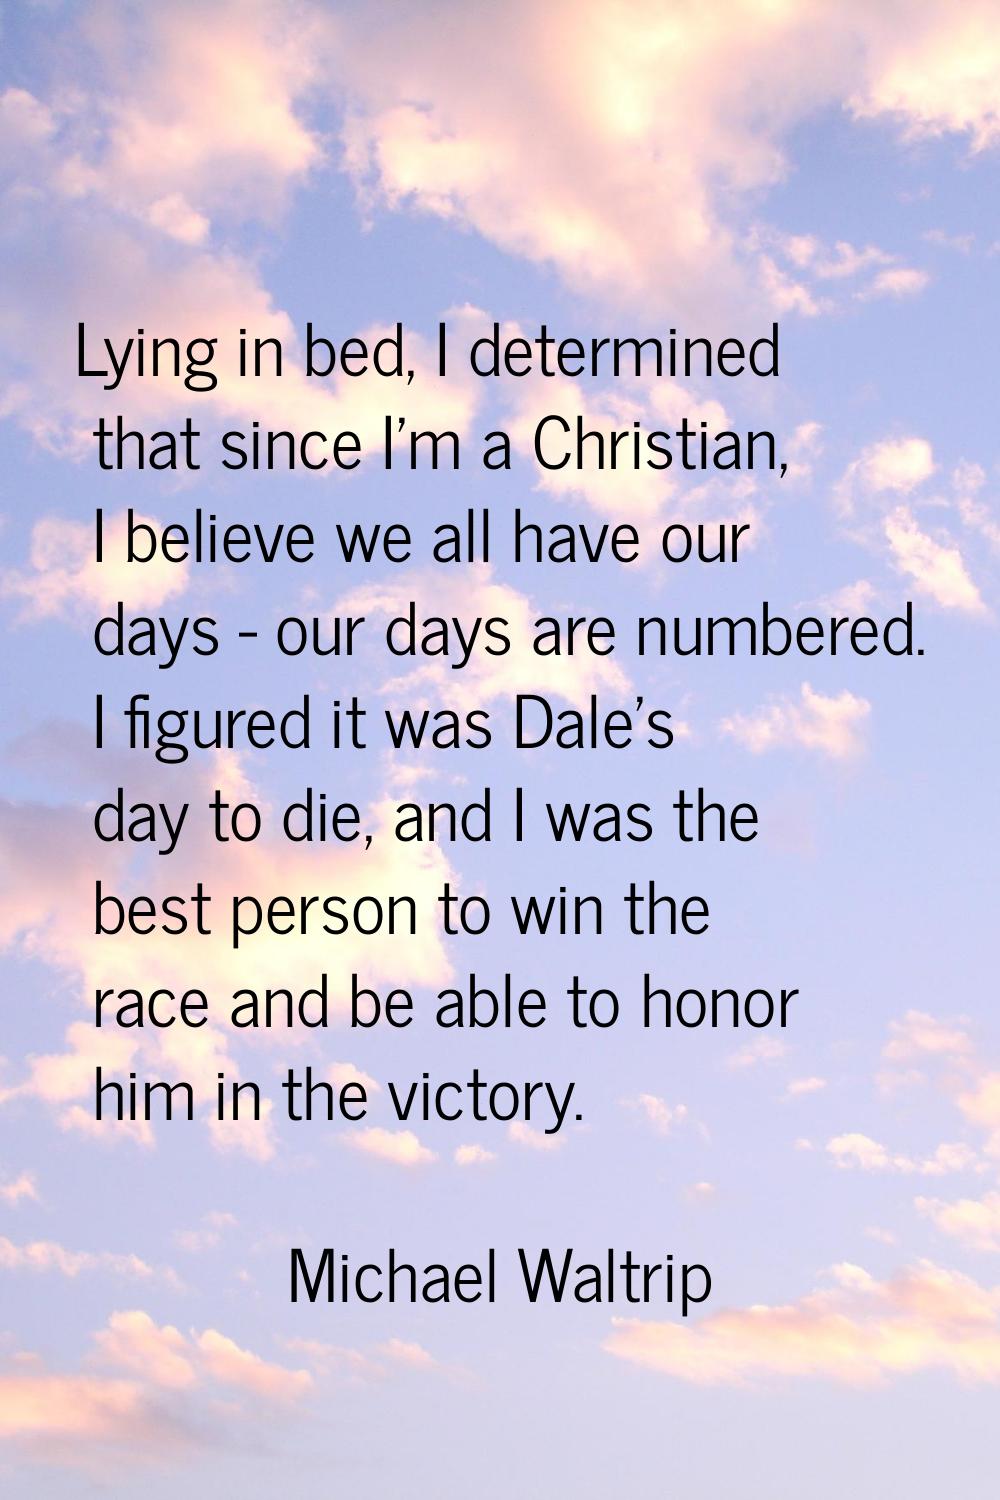 Lying in bed, I determined that since I'm a Christian, I believe we all have our days - our days ar